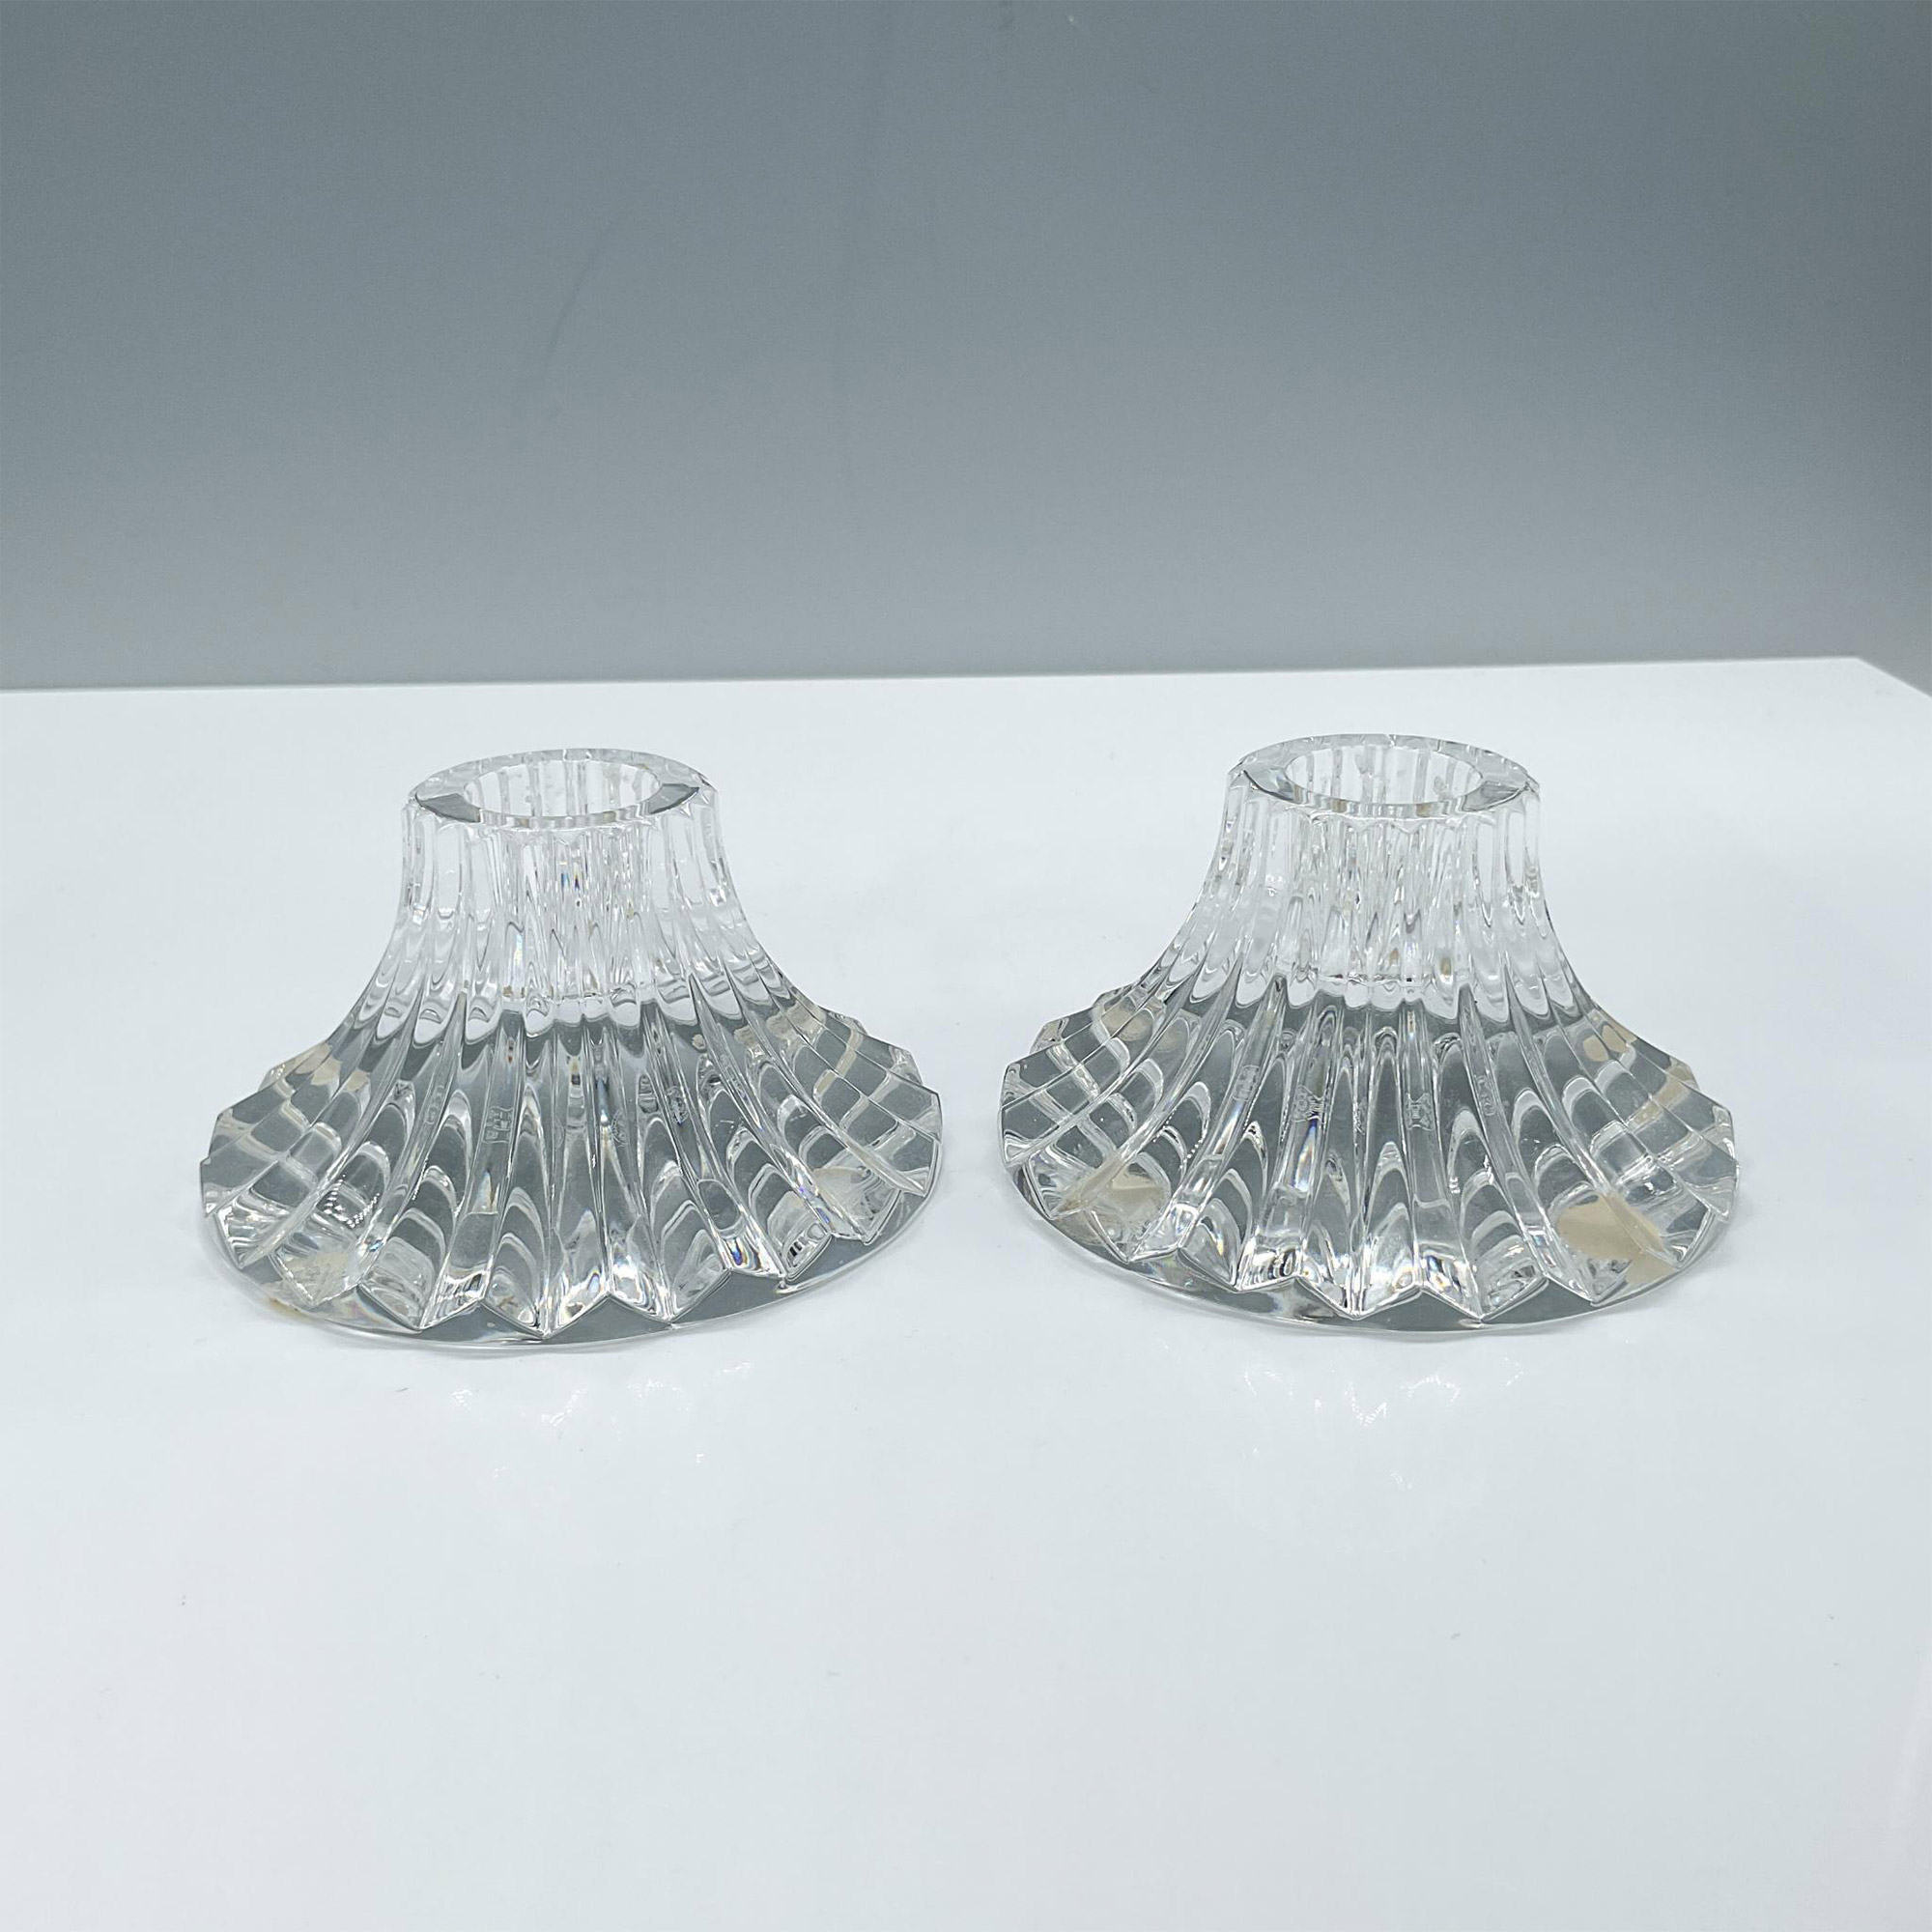 Pair of Baccarat Crystal Candle Holders, Massena